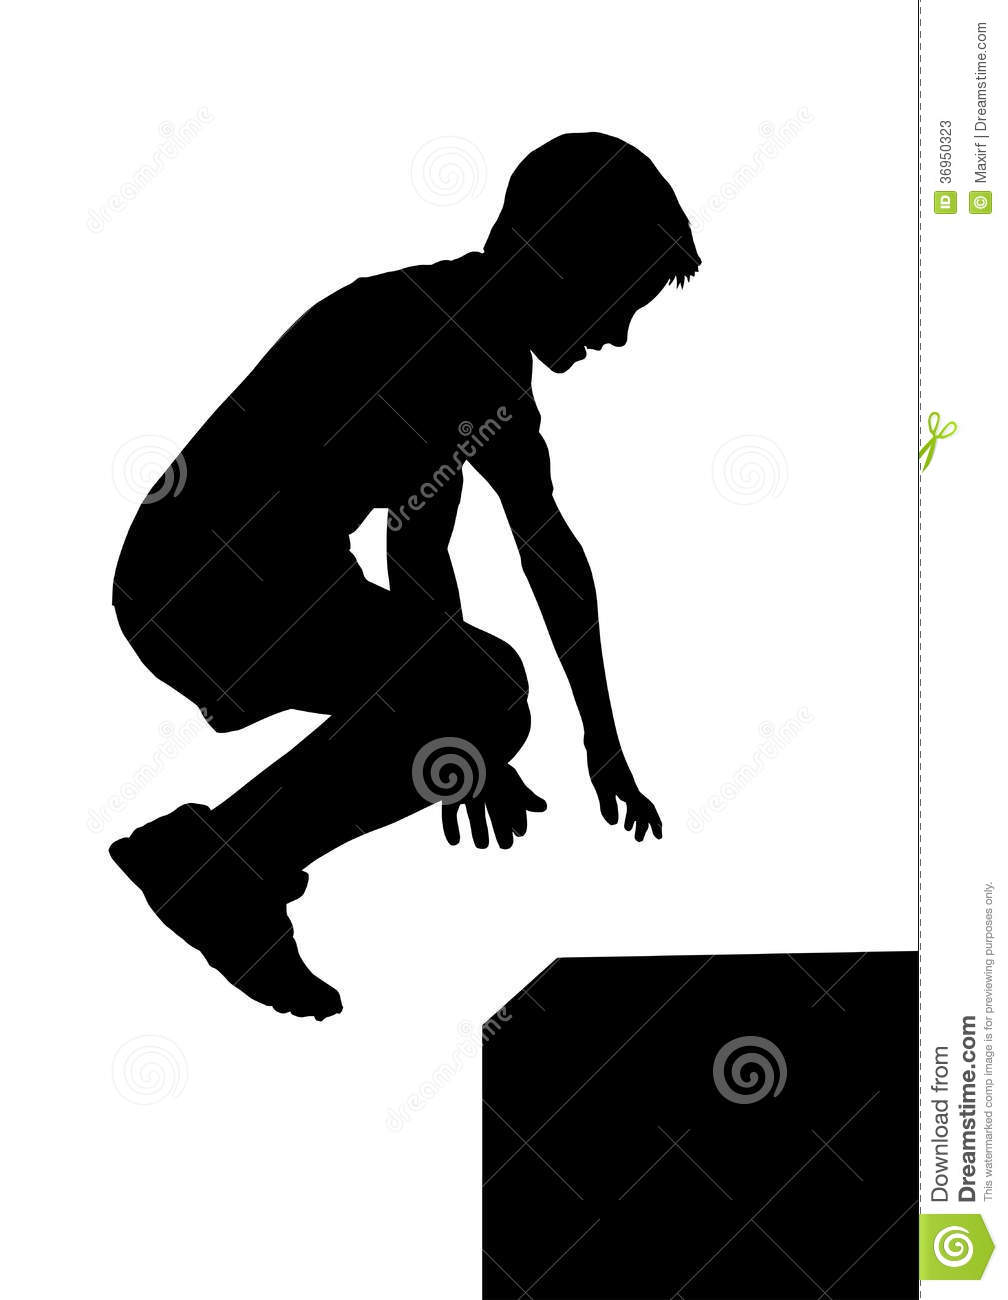 Boy Fitness Exerciser Jumping Silhouette Stock Photos   Image